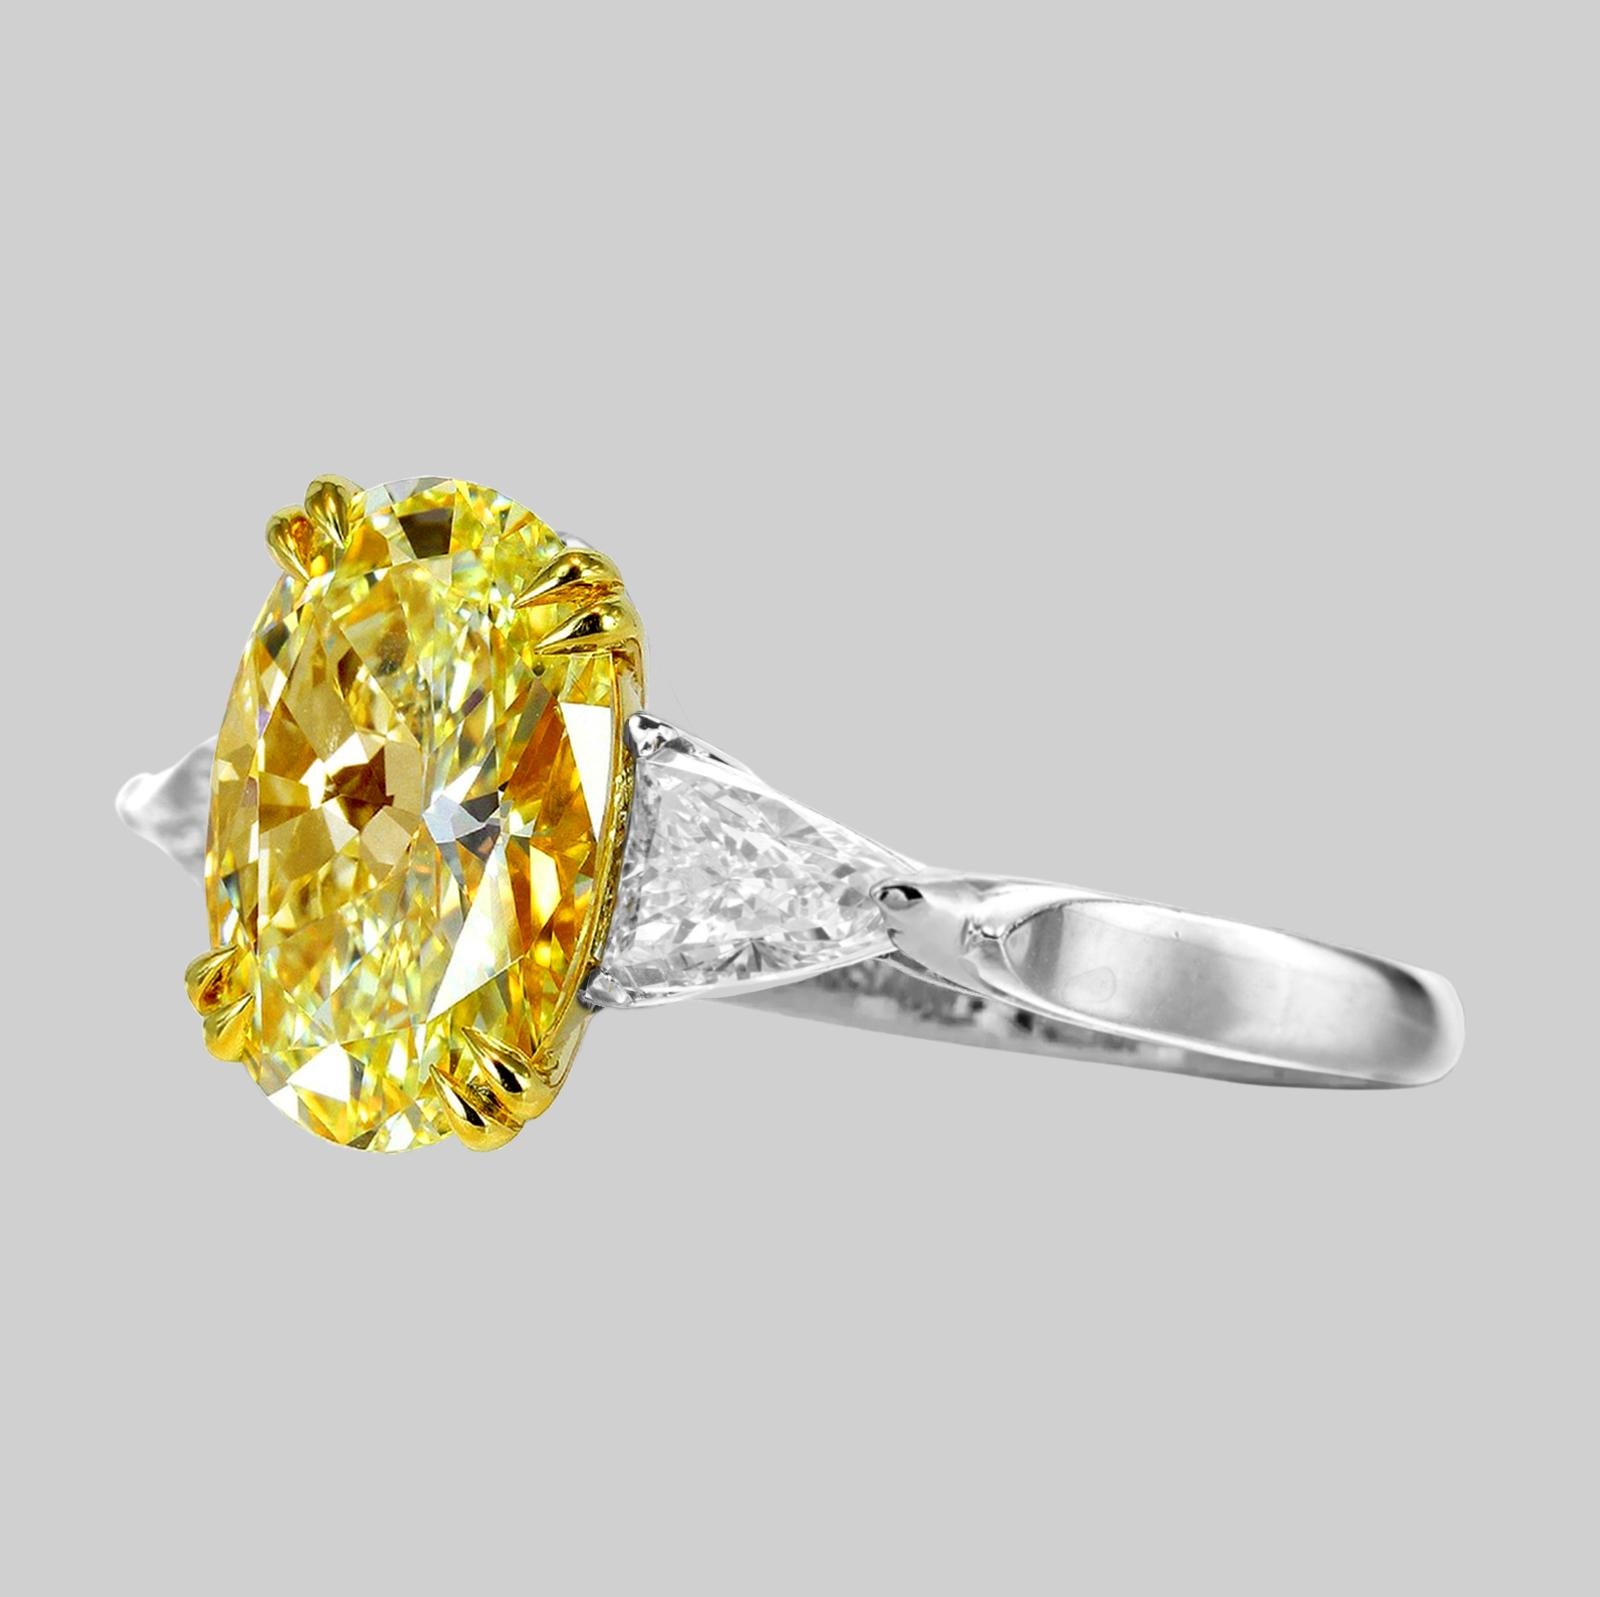 A classic from the italian jewerler Antinori di Sanpietro. An exceptional 6.03-carat oval cut diamond

The gorgeous diamond is certified by the Gemological Institute of America (GIA) as being Fancy yellow in color and VS2 Clarity meaning it is 100%